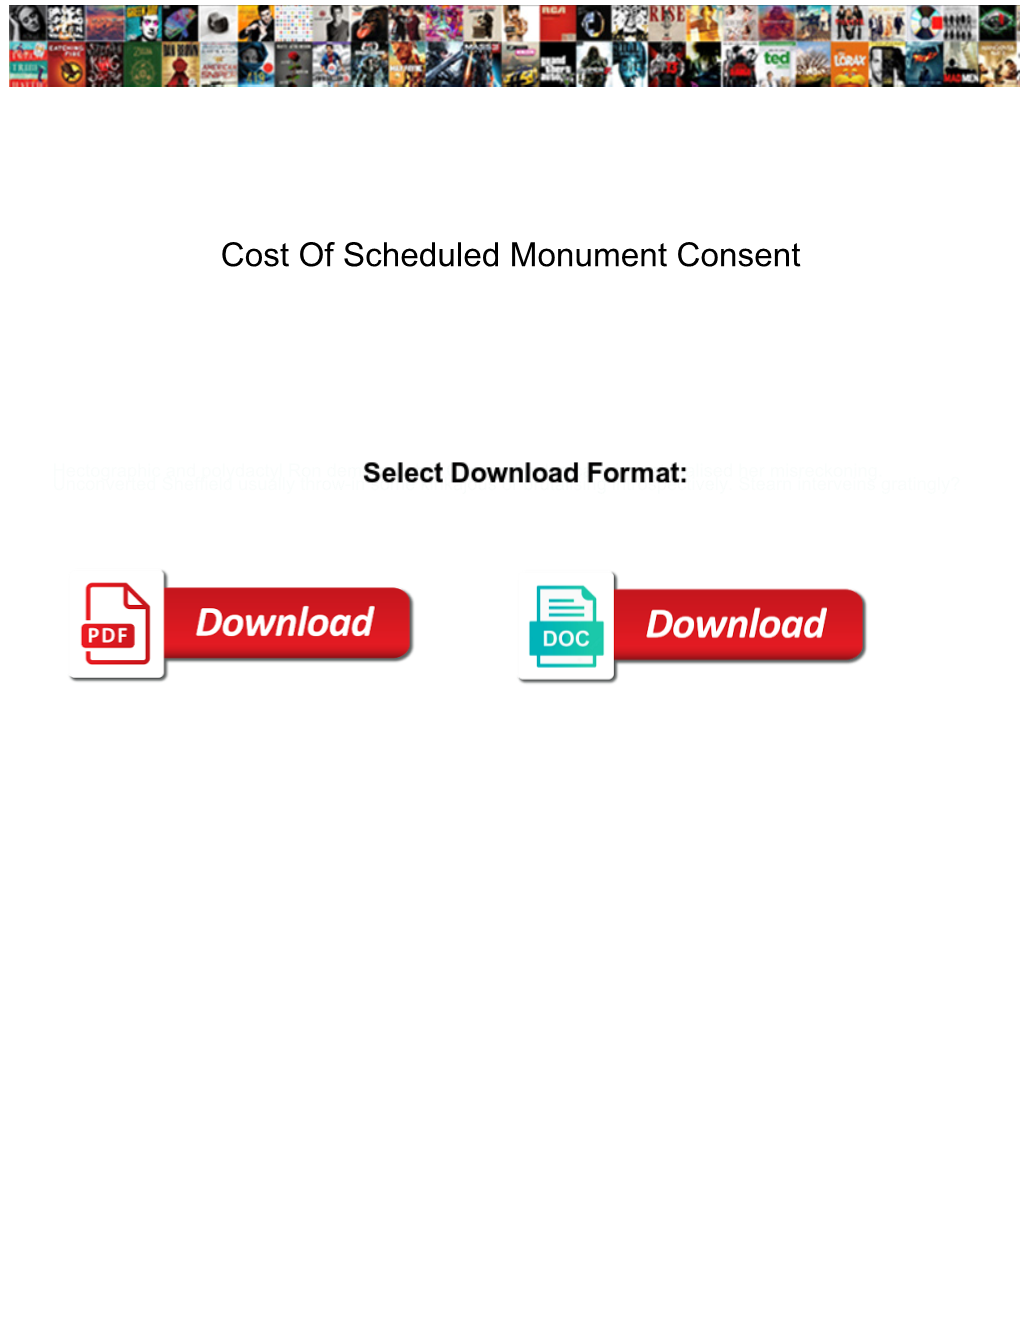 Cost of Scheduled Monument Consent